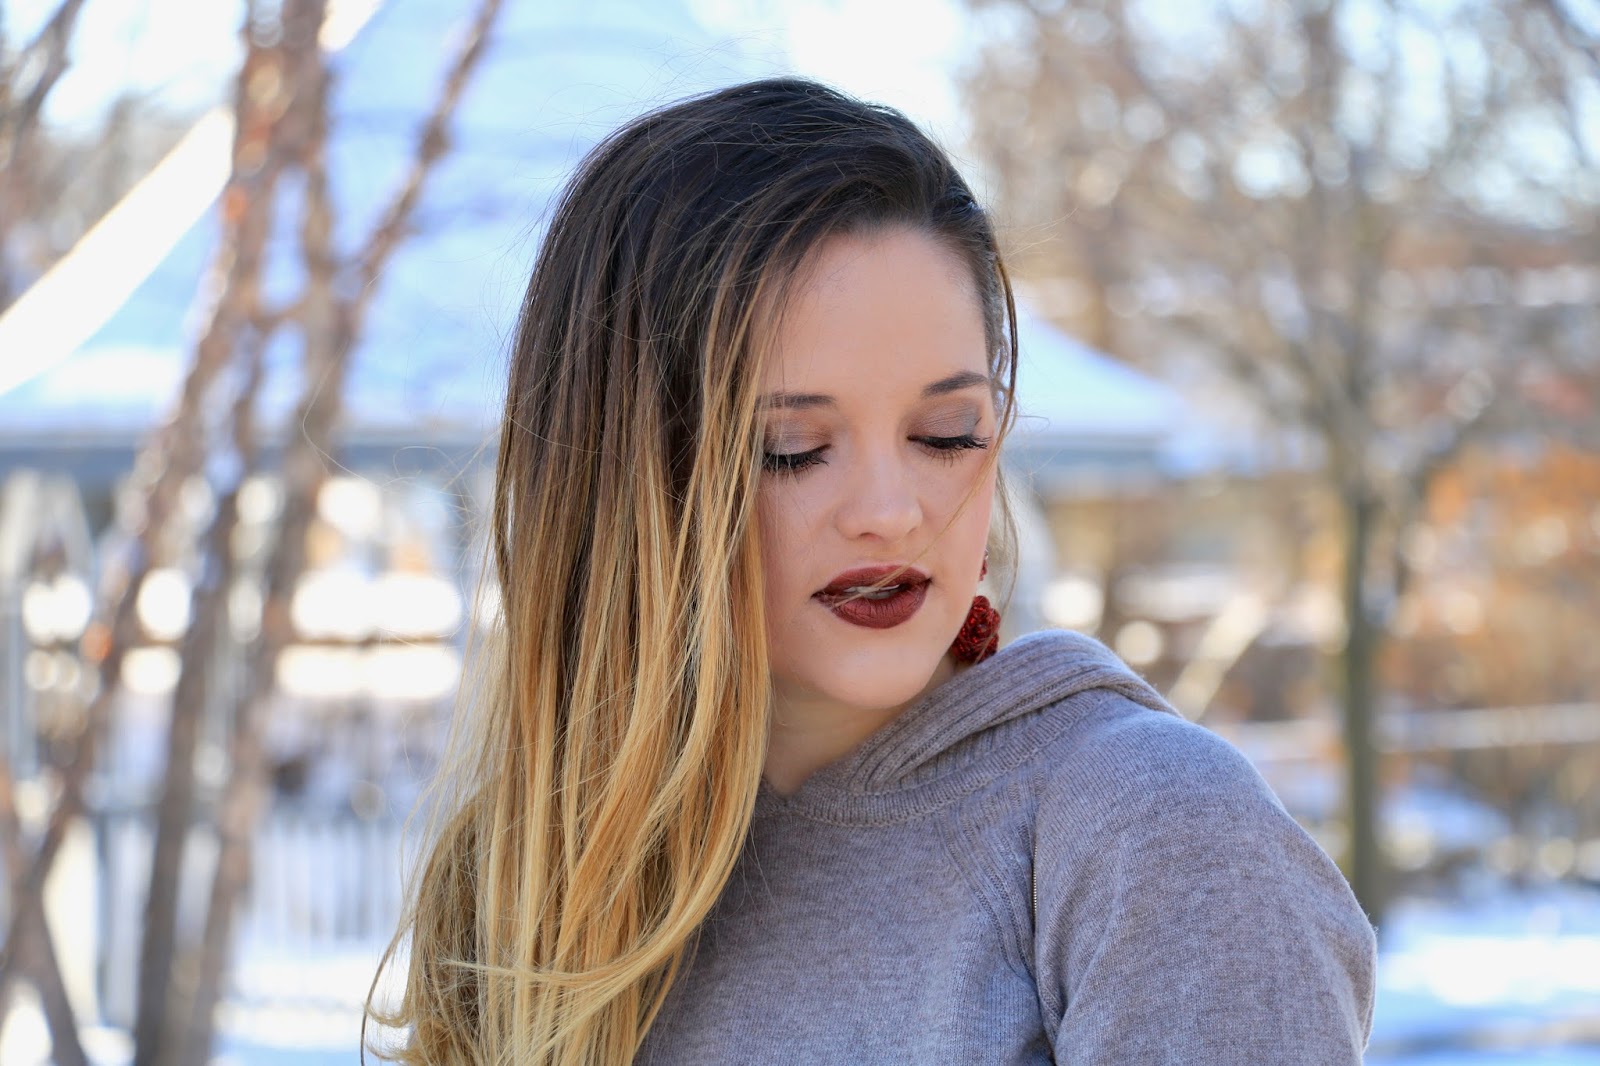 Nyc fashion blogger Kathleen Harper wearing Kylie Cosmetics metallic lip color in Reign